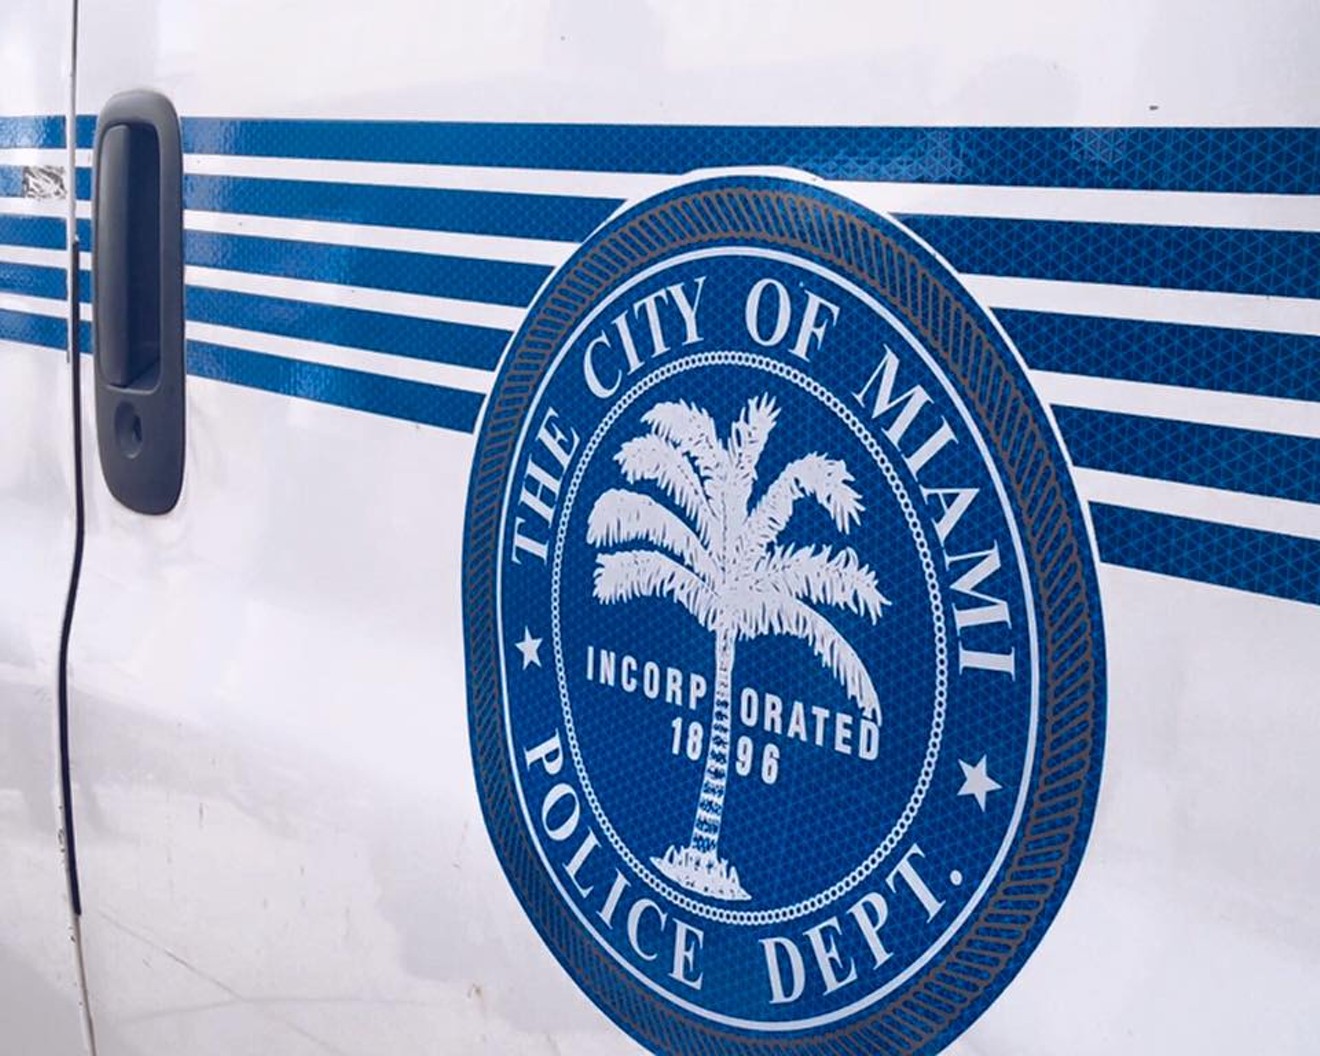 A WLRN reporter compiled a database of complaints against City of Miami police officers.